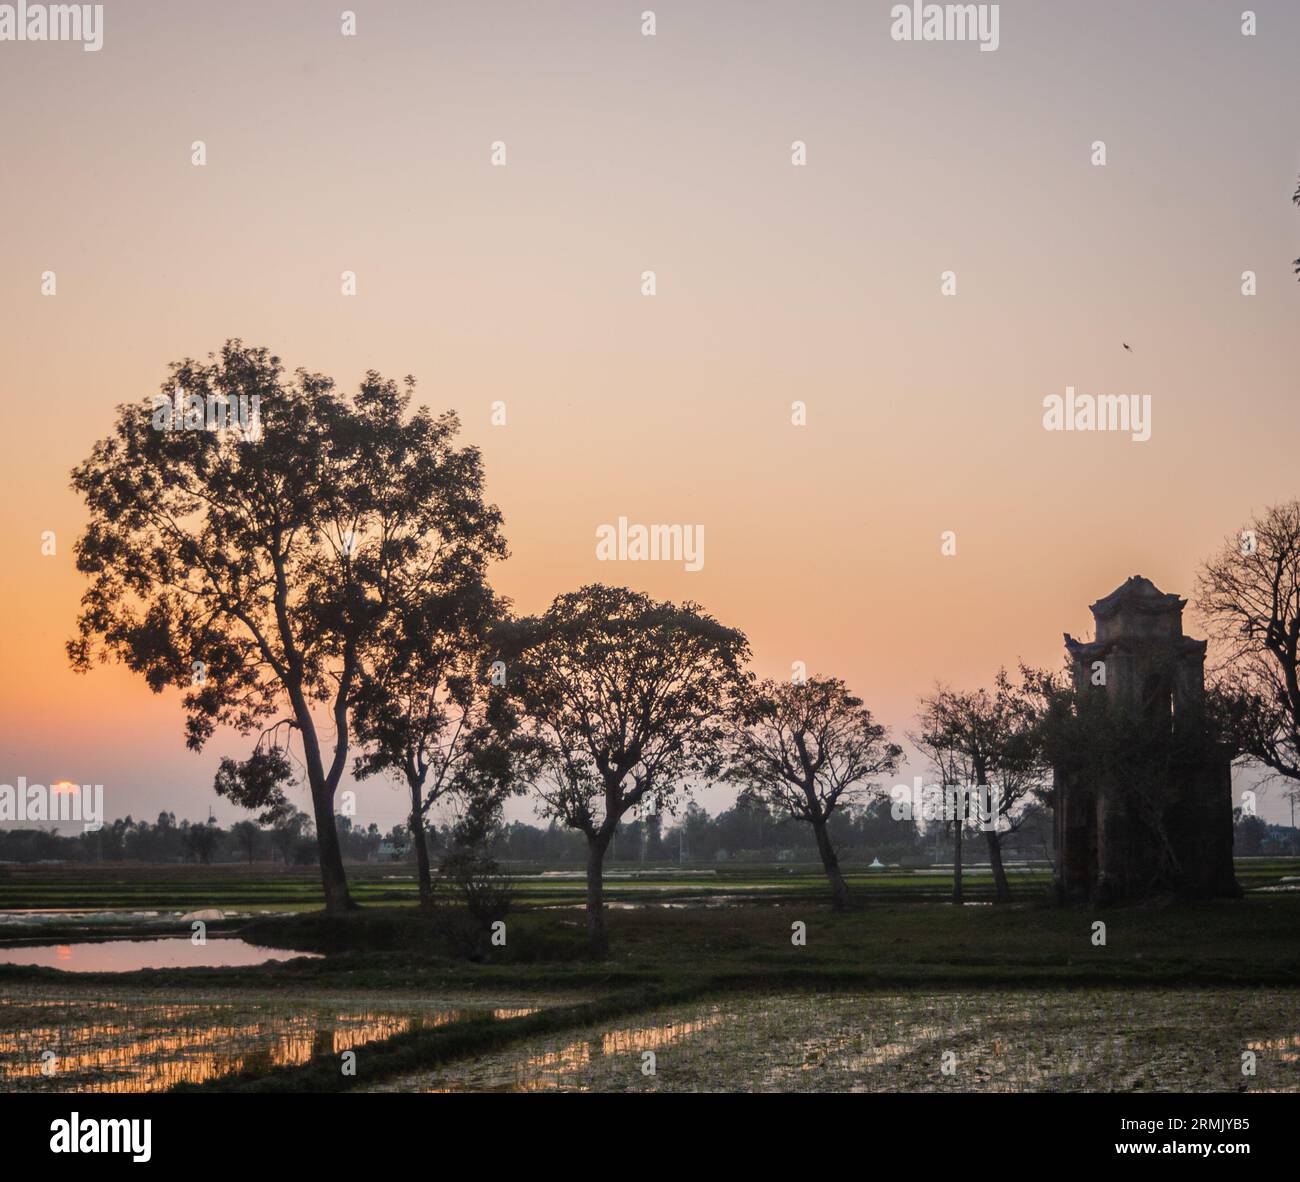 Sunset on an old relic in Ha Tinh Vietnam a relic called Van Thanh an ancient relic built a hundred years ago in Duc Thuan village Ha Tinh Vietnam Stock Photo